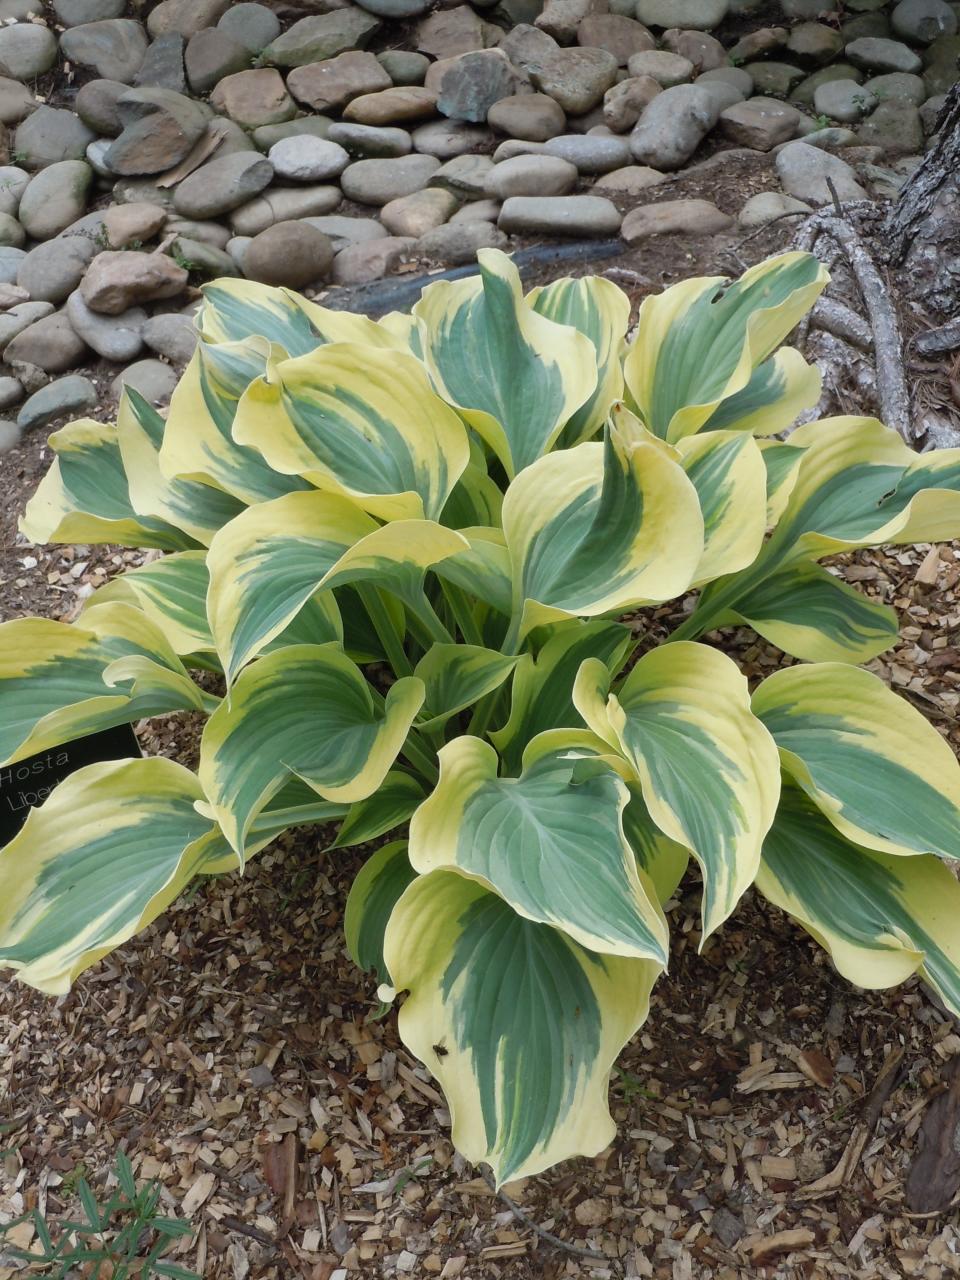 A hosta with yellow variegated leaves. Plants with this leaf pattern have a mutation in part of the leaf that blocks production of chlorophyll.